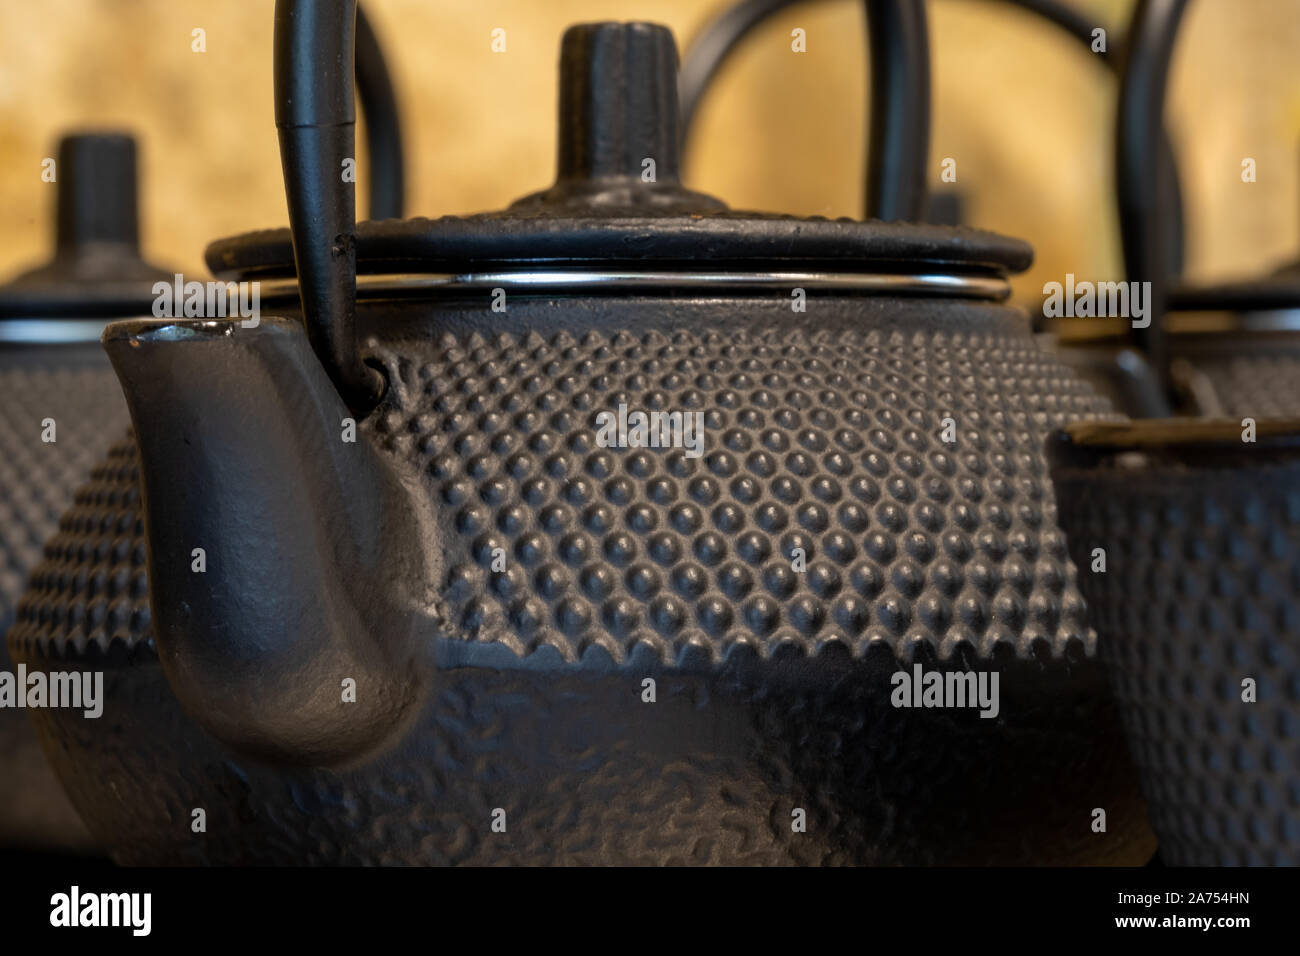 Close up of black textured cast iron Asian style tea pots with handles and matching cups. Stock Photo